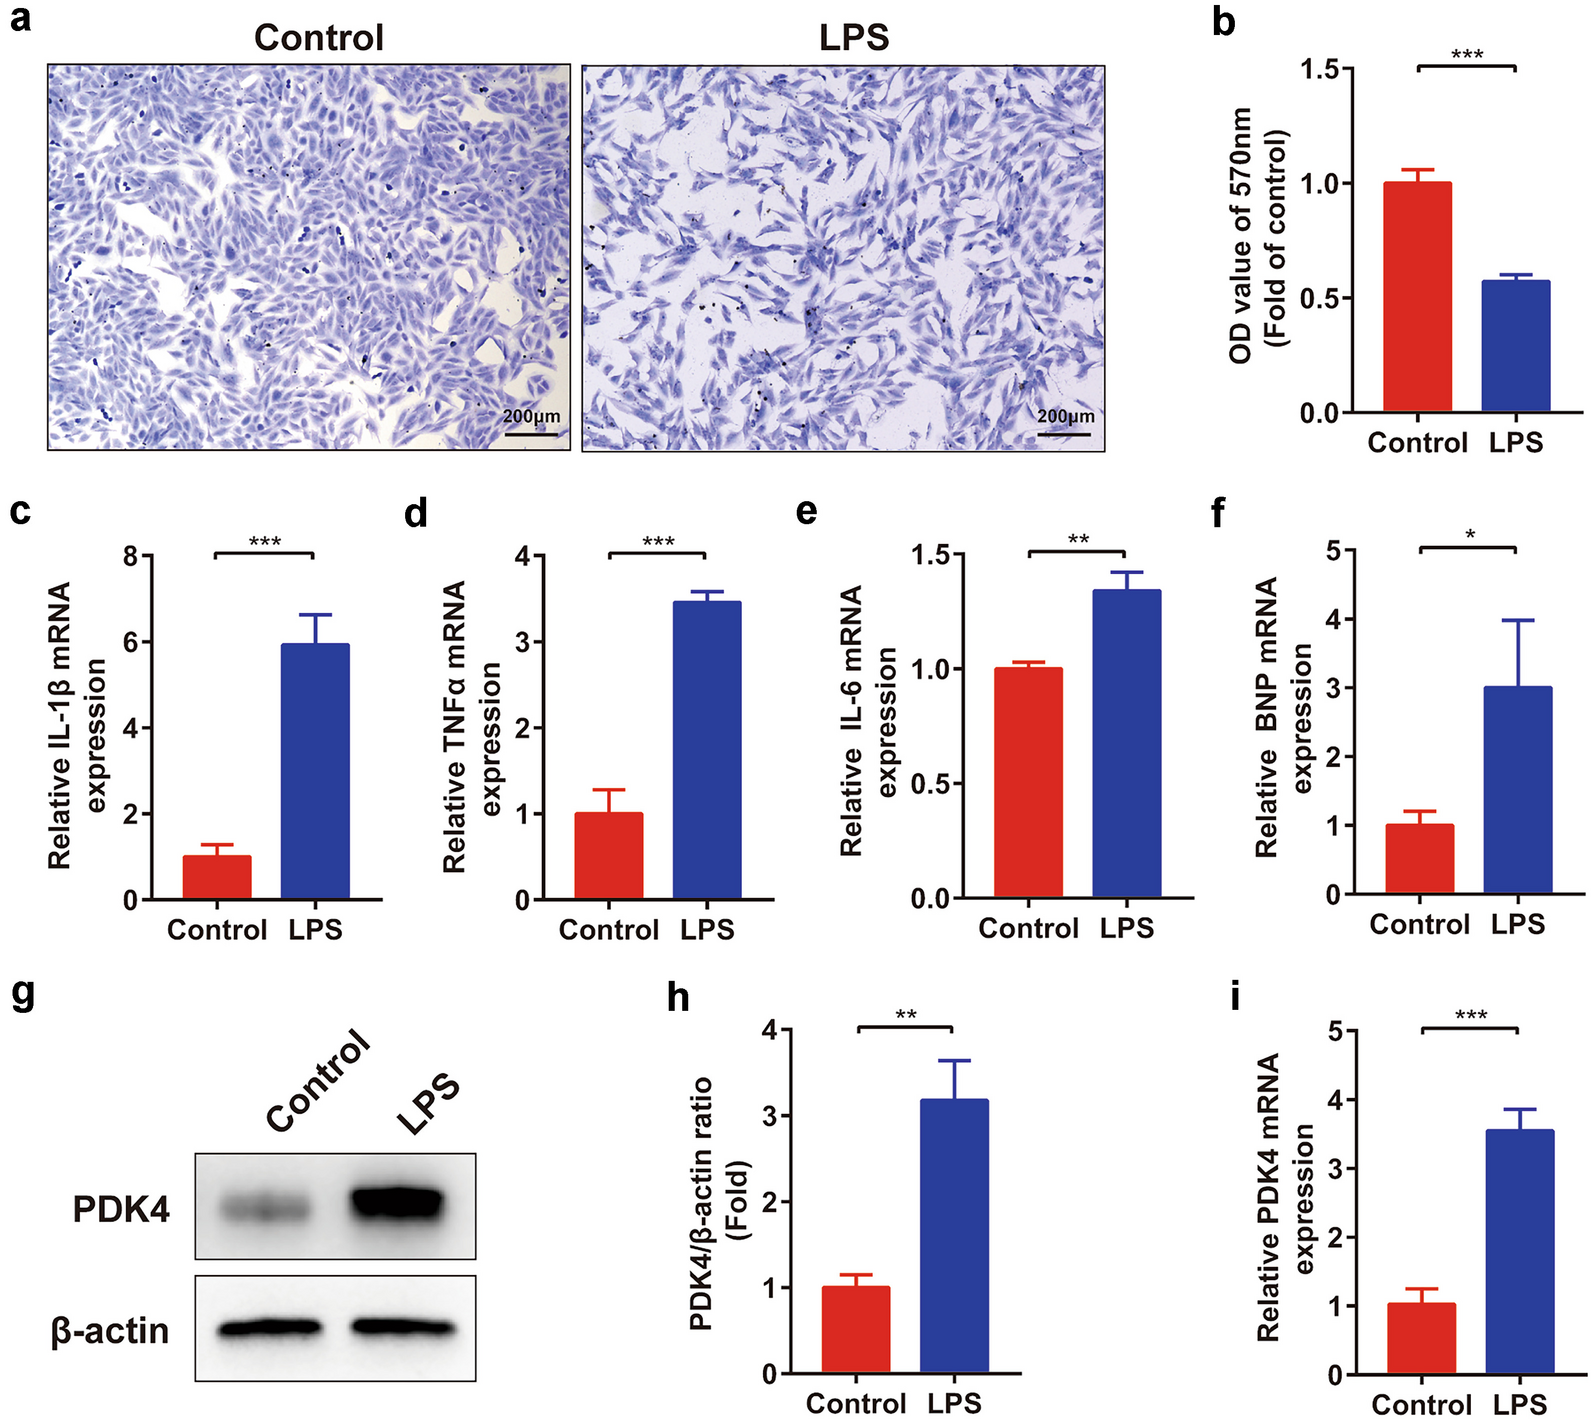 Inhibition of Pyruvate Dehydrogenase Kinase 4 Protects Cardiomyocytes from lipopolysaccharide-Induced Mitochondrial Damage by Reducing Lactate Accumulation